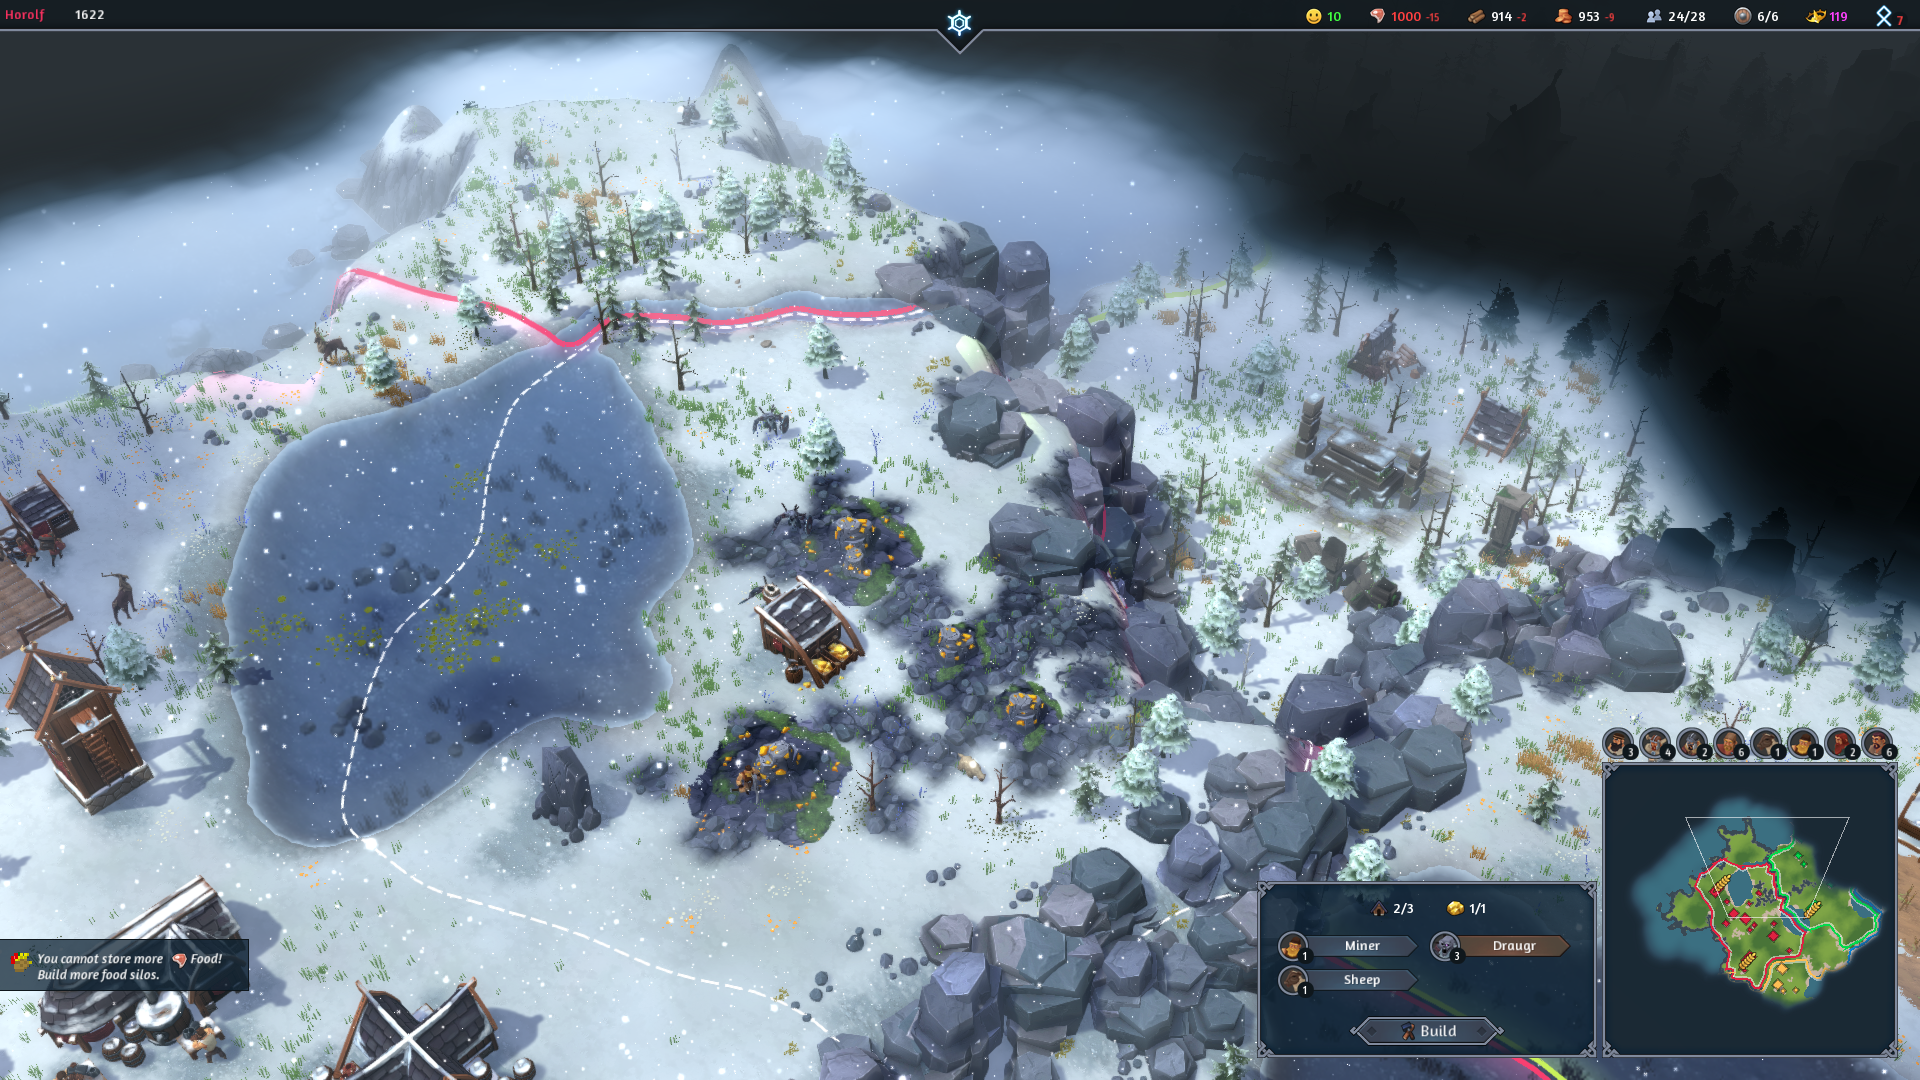 Northgard Picture